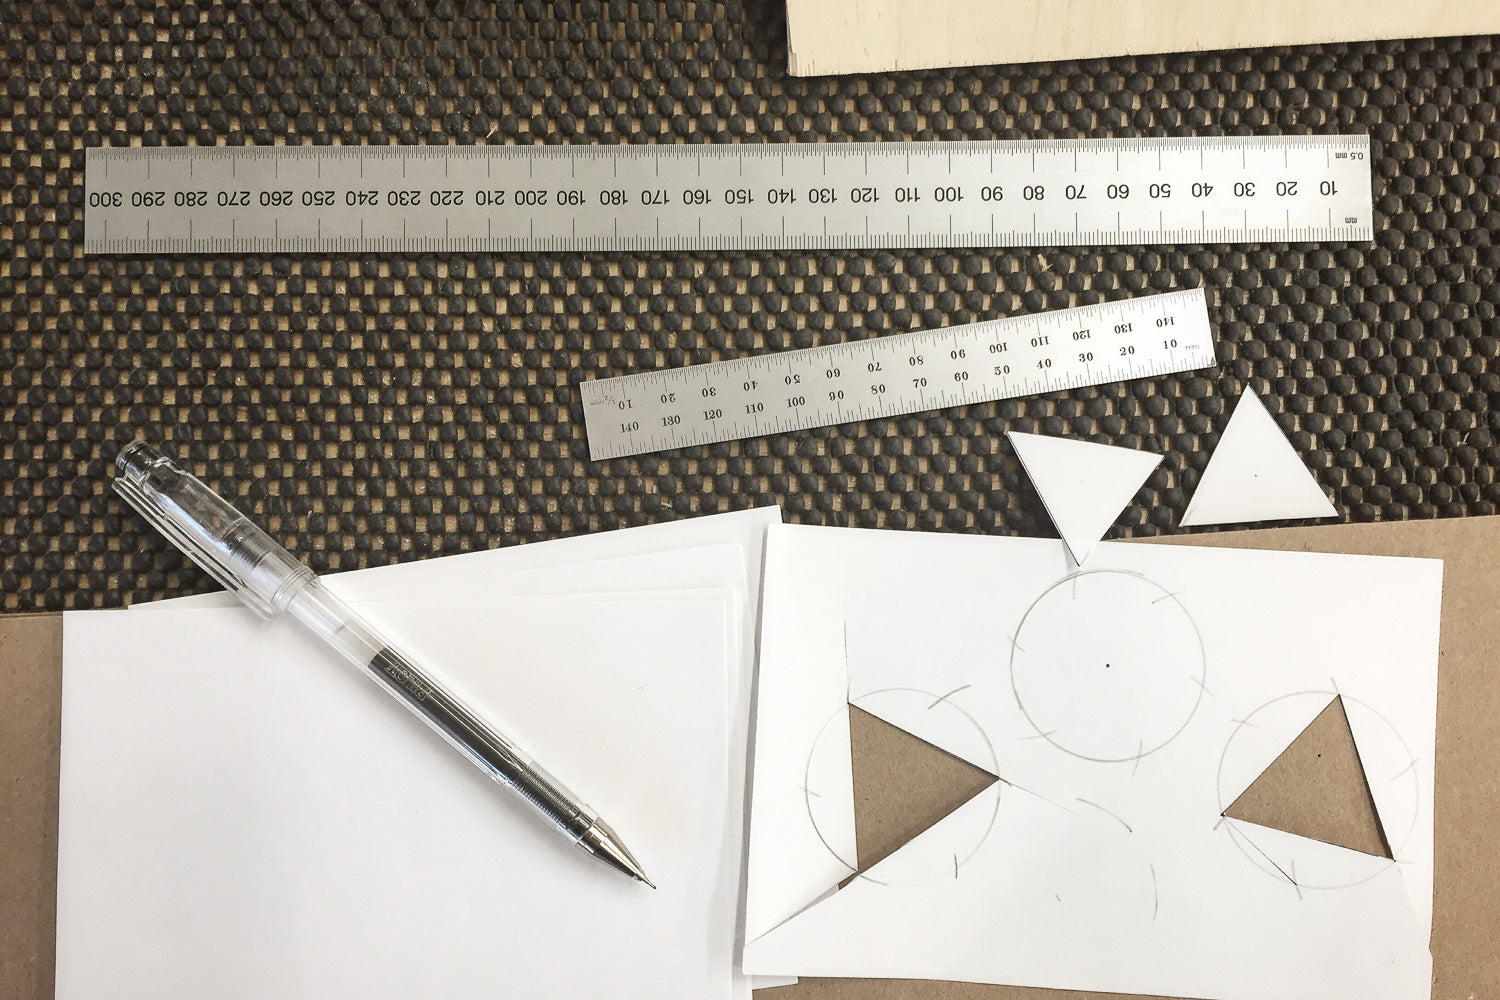 Pen and rulers with paper cut outs — part of the design process